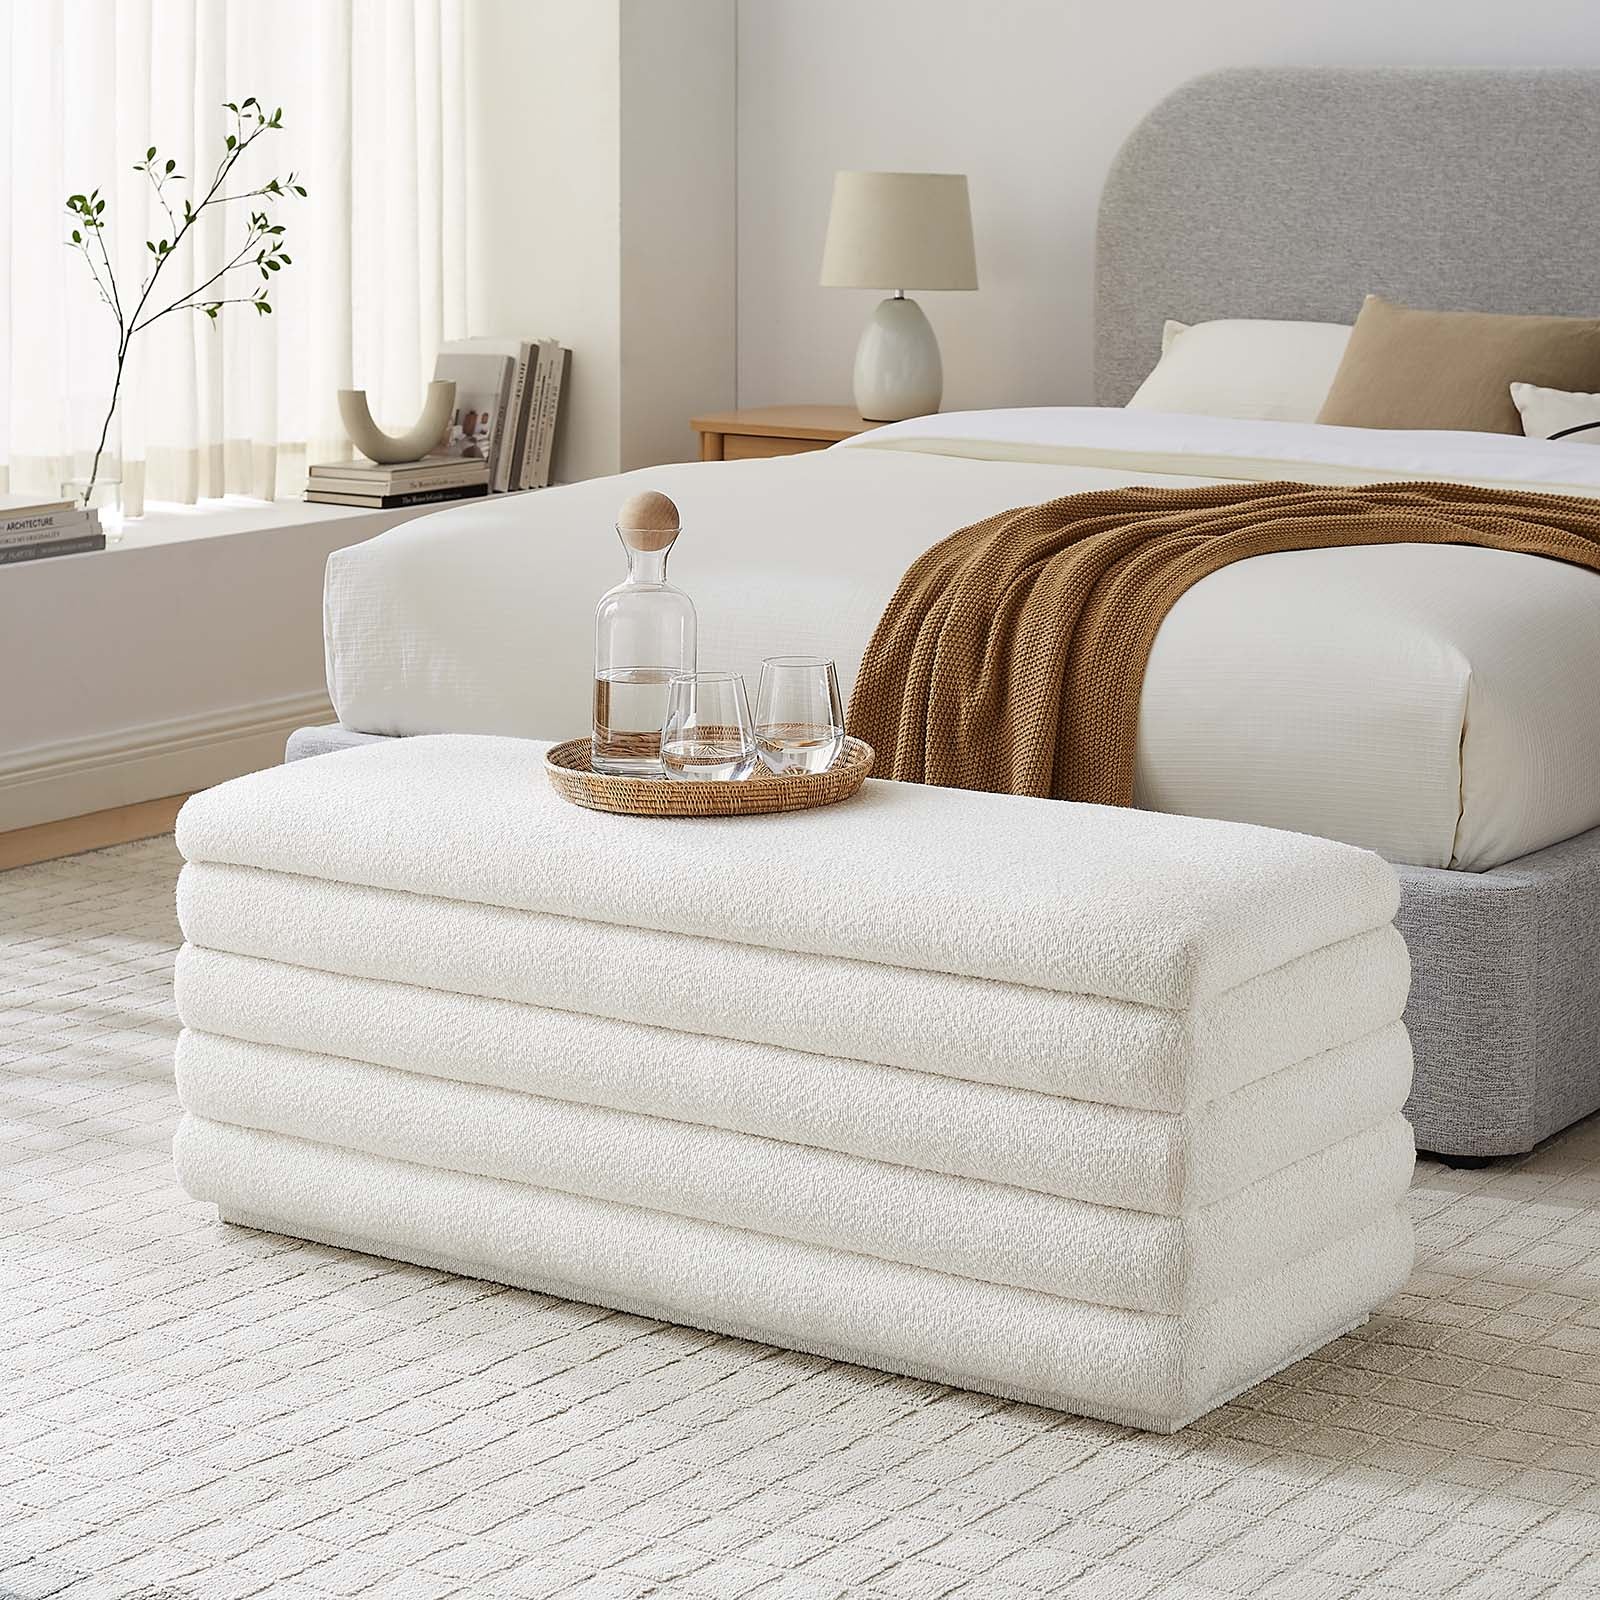 Mezzo Boucle Upholstered Storage Bench - East Shore Modern Home Furnishings